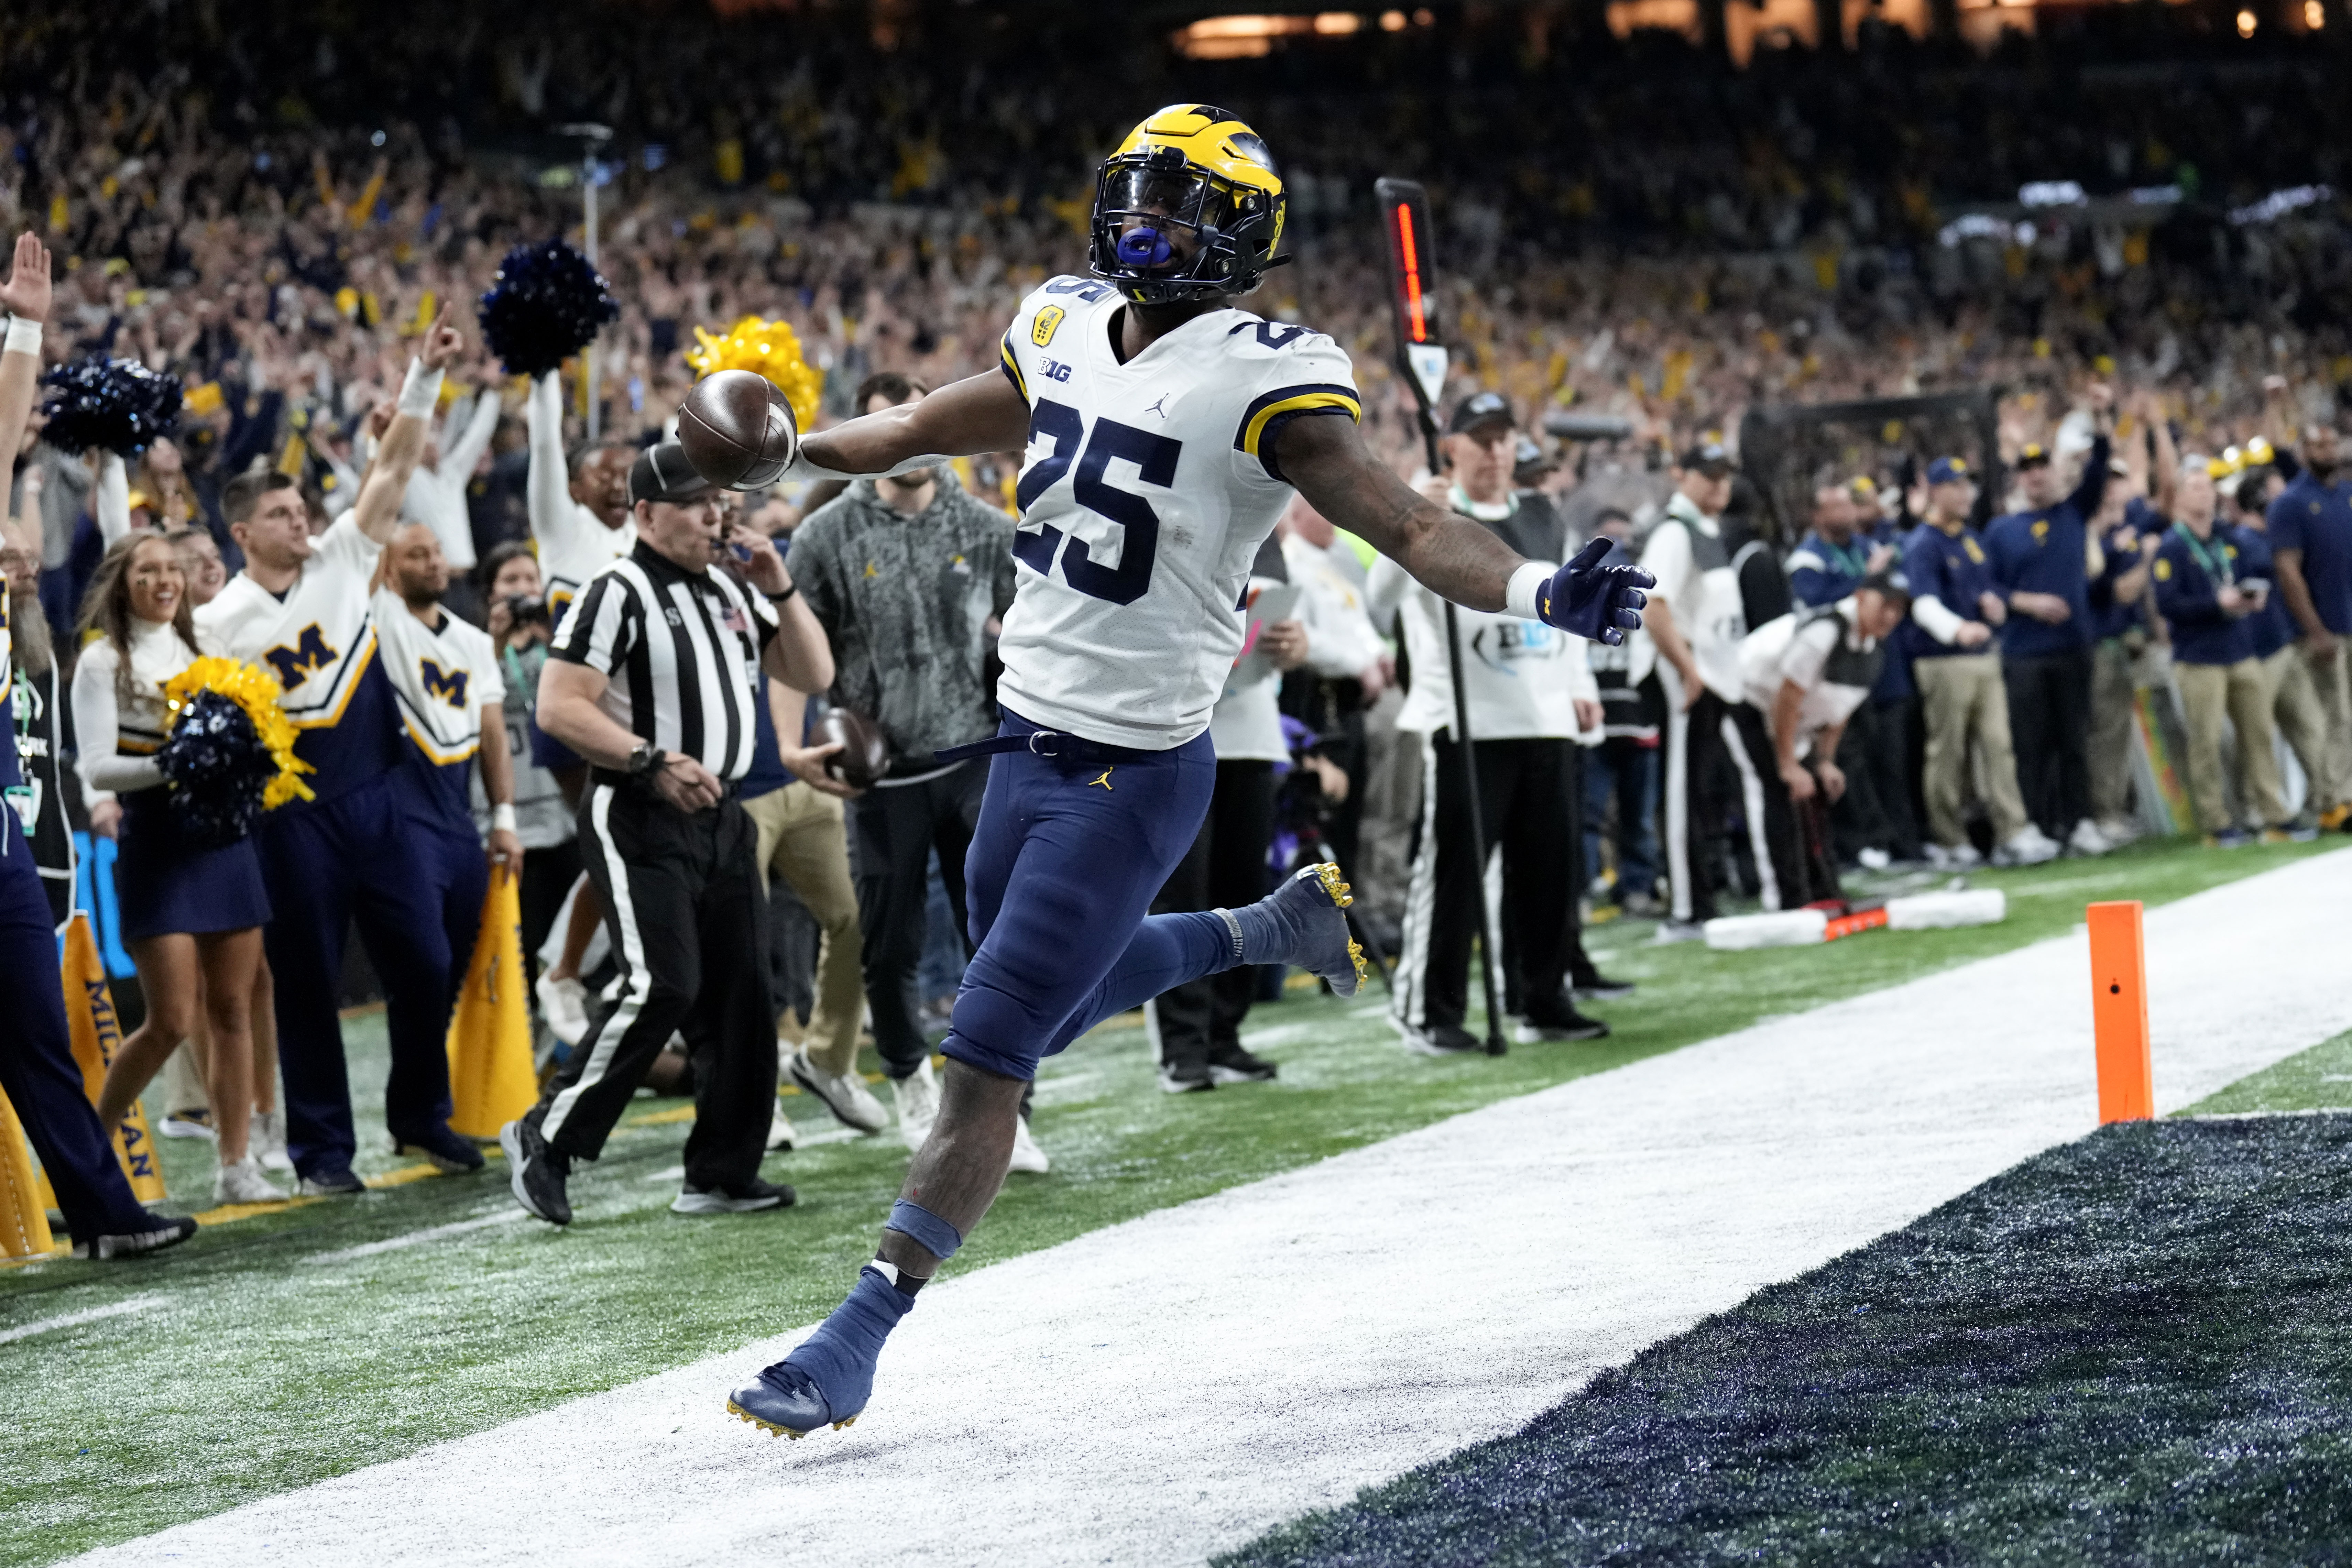 Hassan Haskins celebrates after scoring on one of his two rushing touchdowns in Michigan's Big Ten title win.